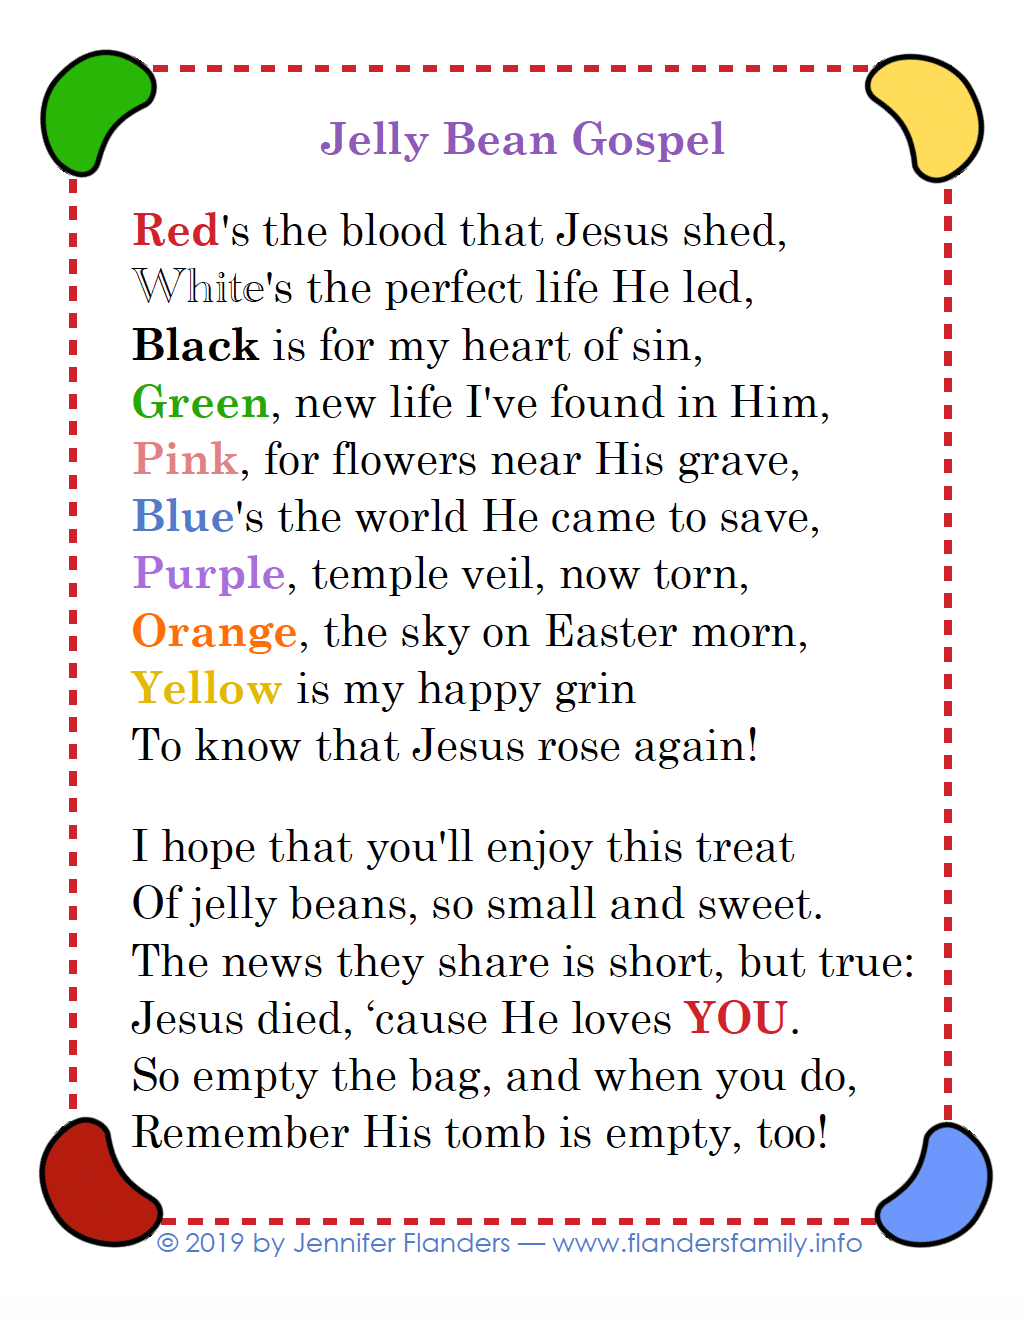 The Jelly Bean Gospel (a free printable from www.flandersfamily.info)